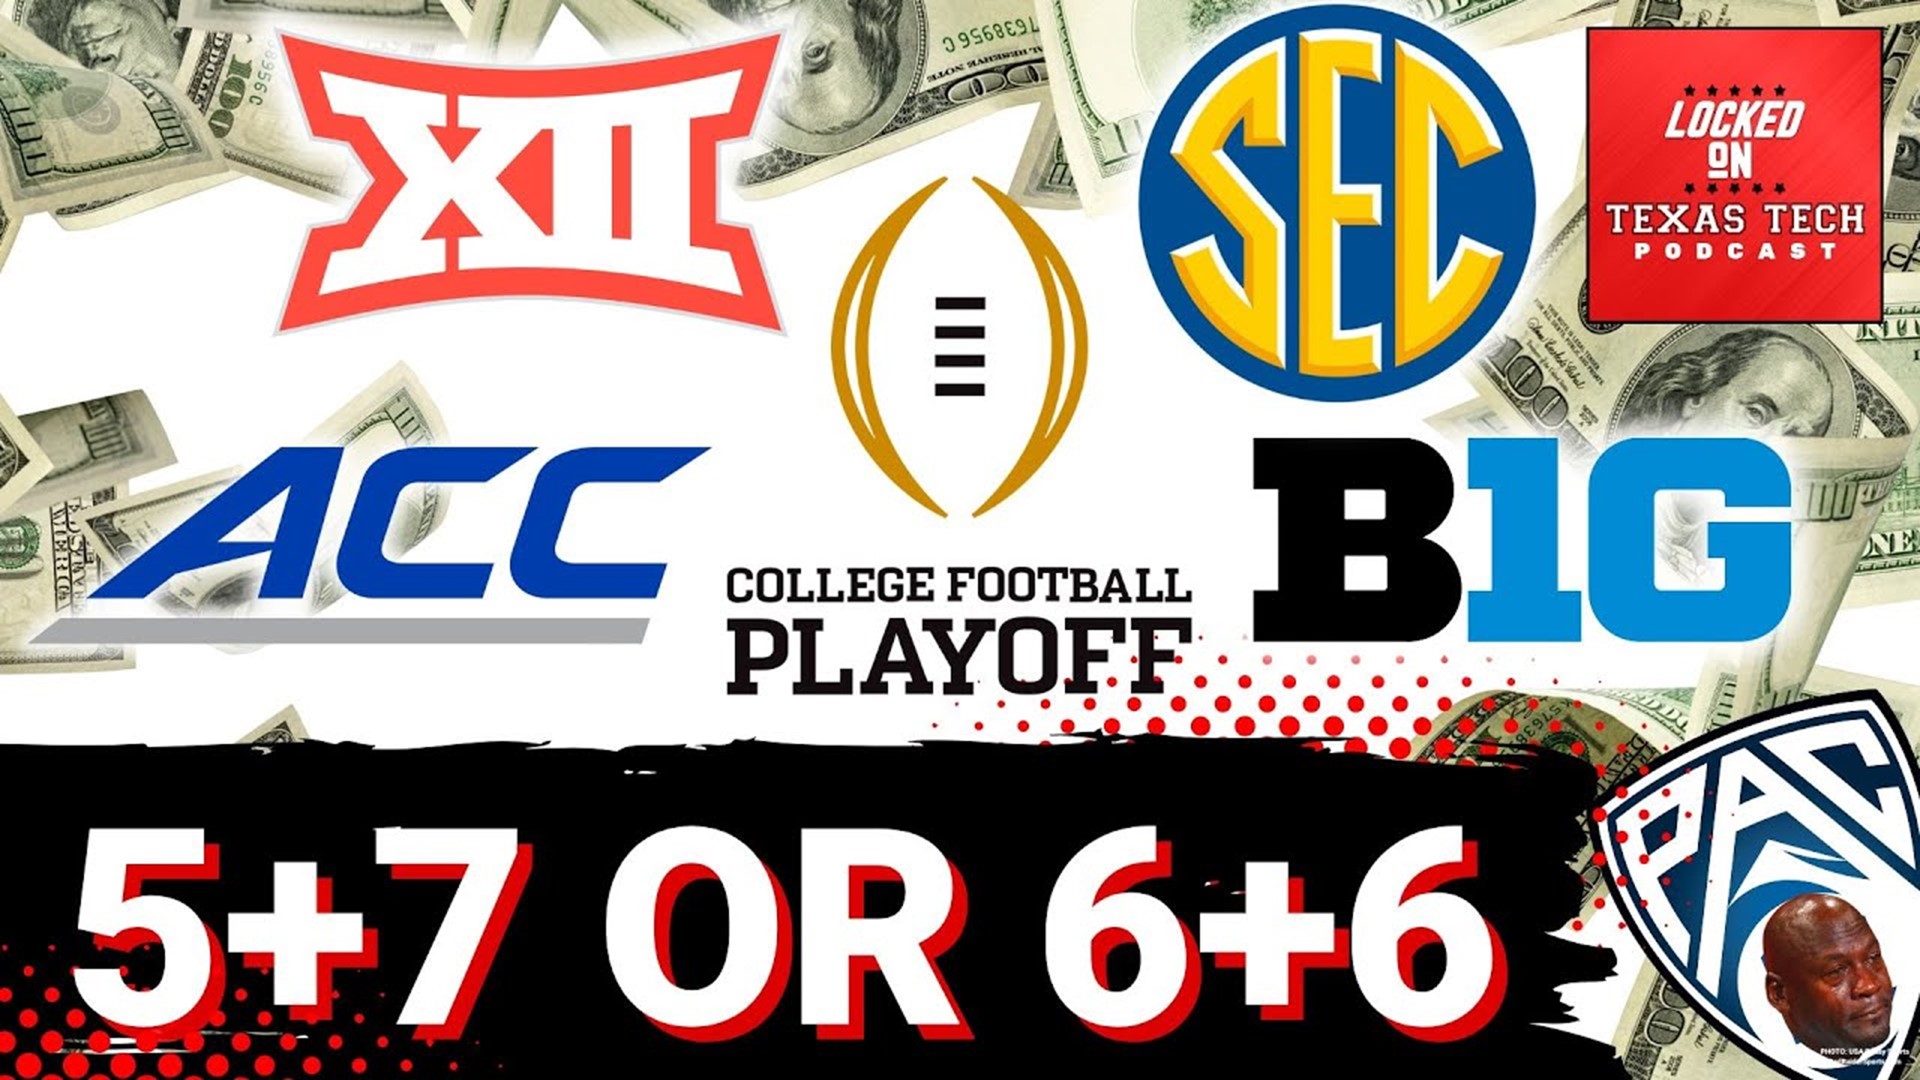 Today from Lubbock, TX, on Locked On Texas Tech:

- CFP: 5+7 or 6+6
- Bowl tie-ins: to swap or not to swap
- Big 12 win projections